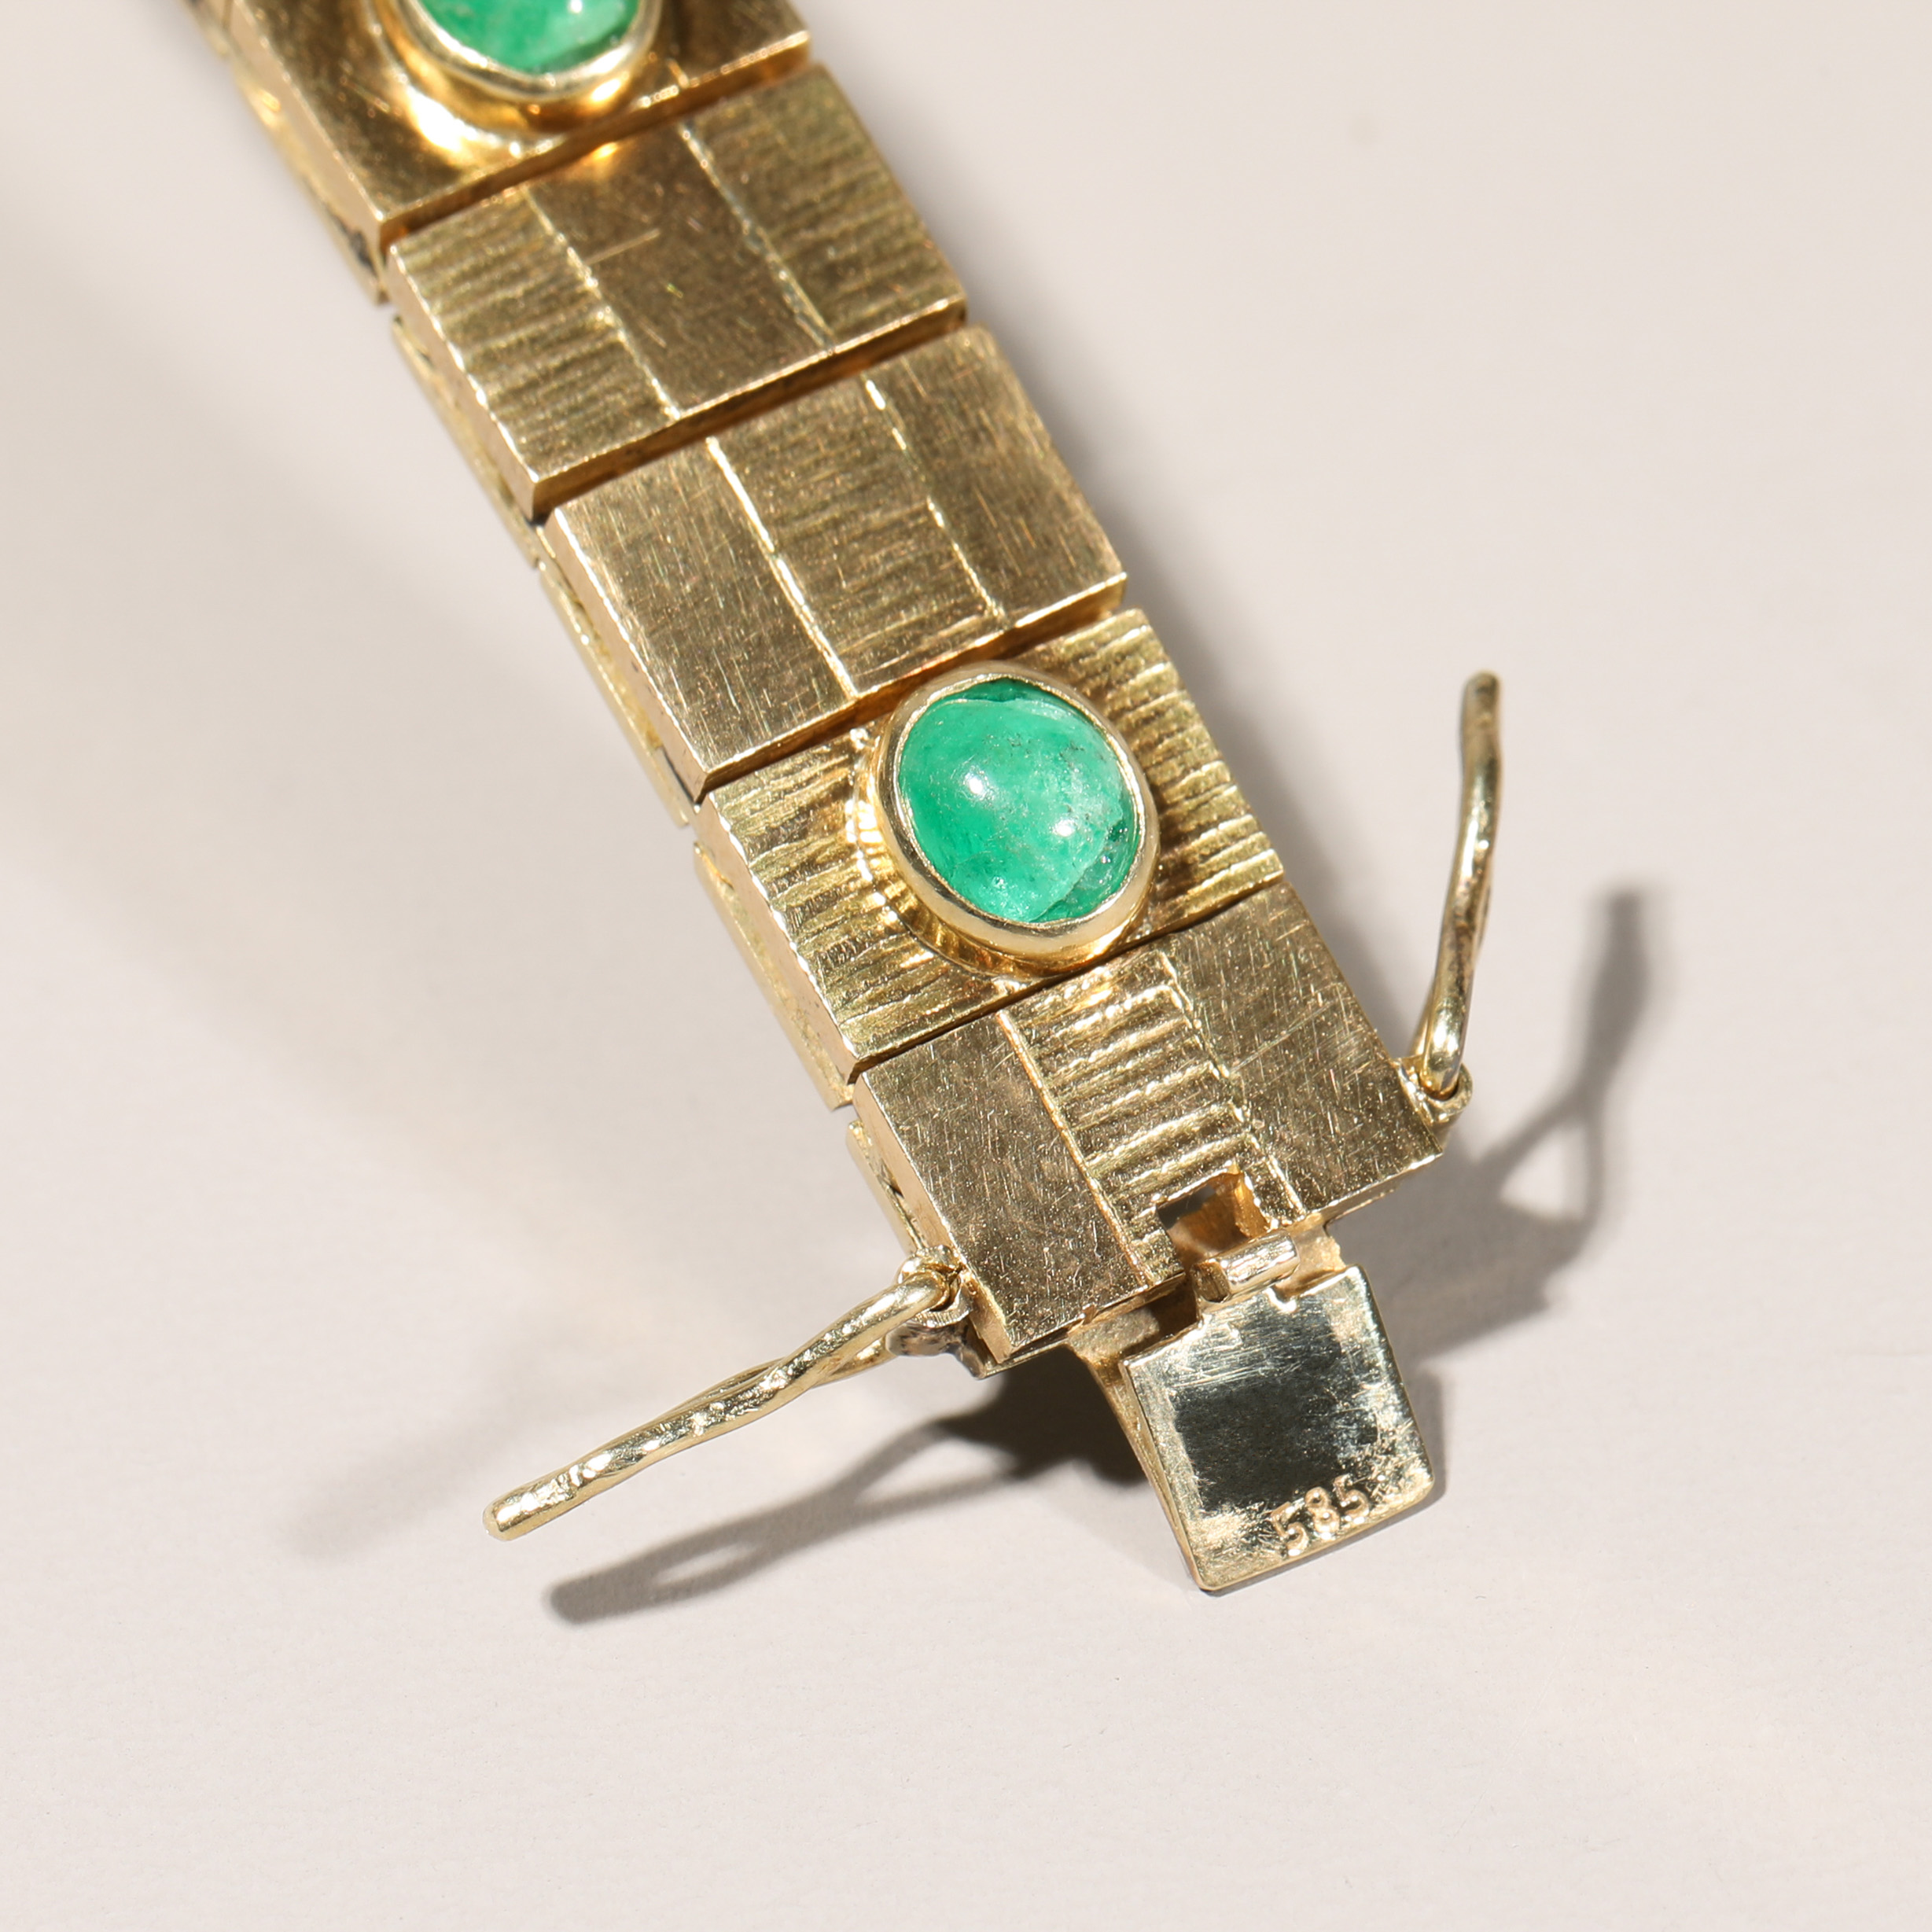 Gold bracelet with emerald cabochons - Image 7 of 7